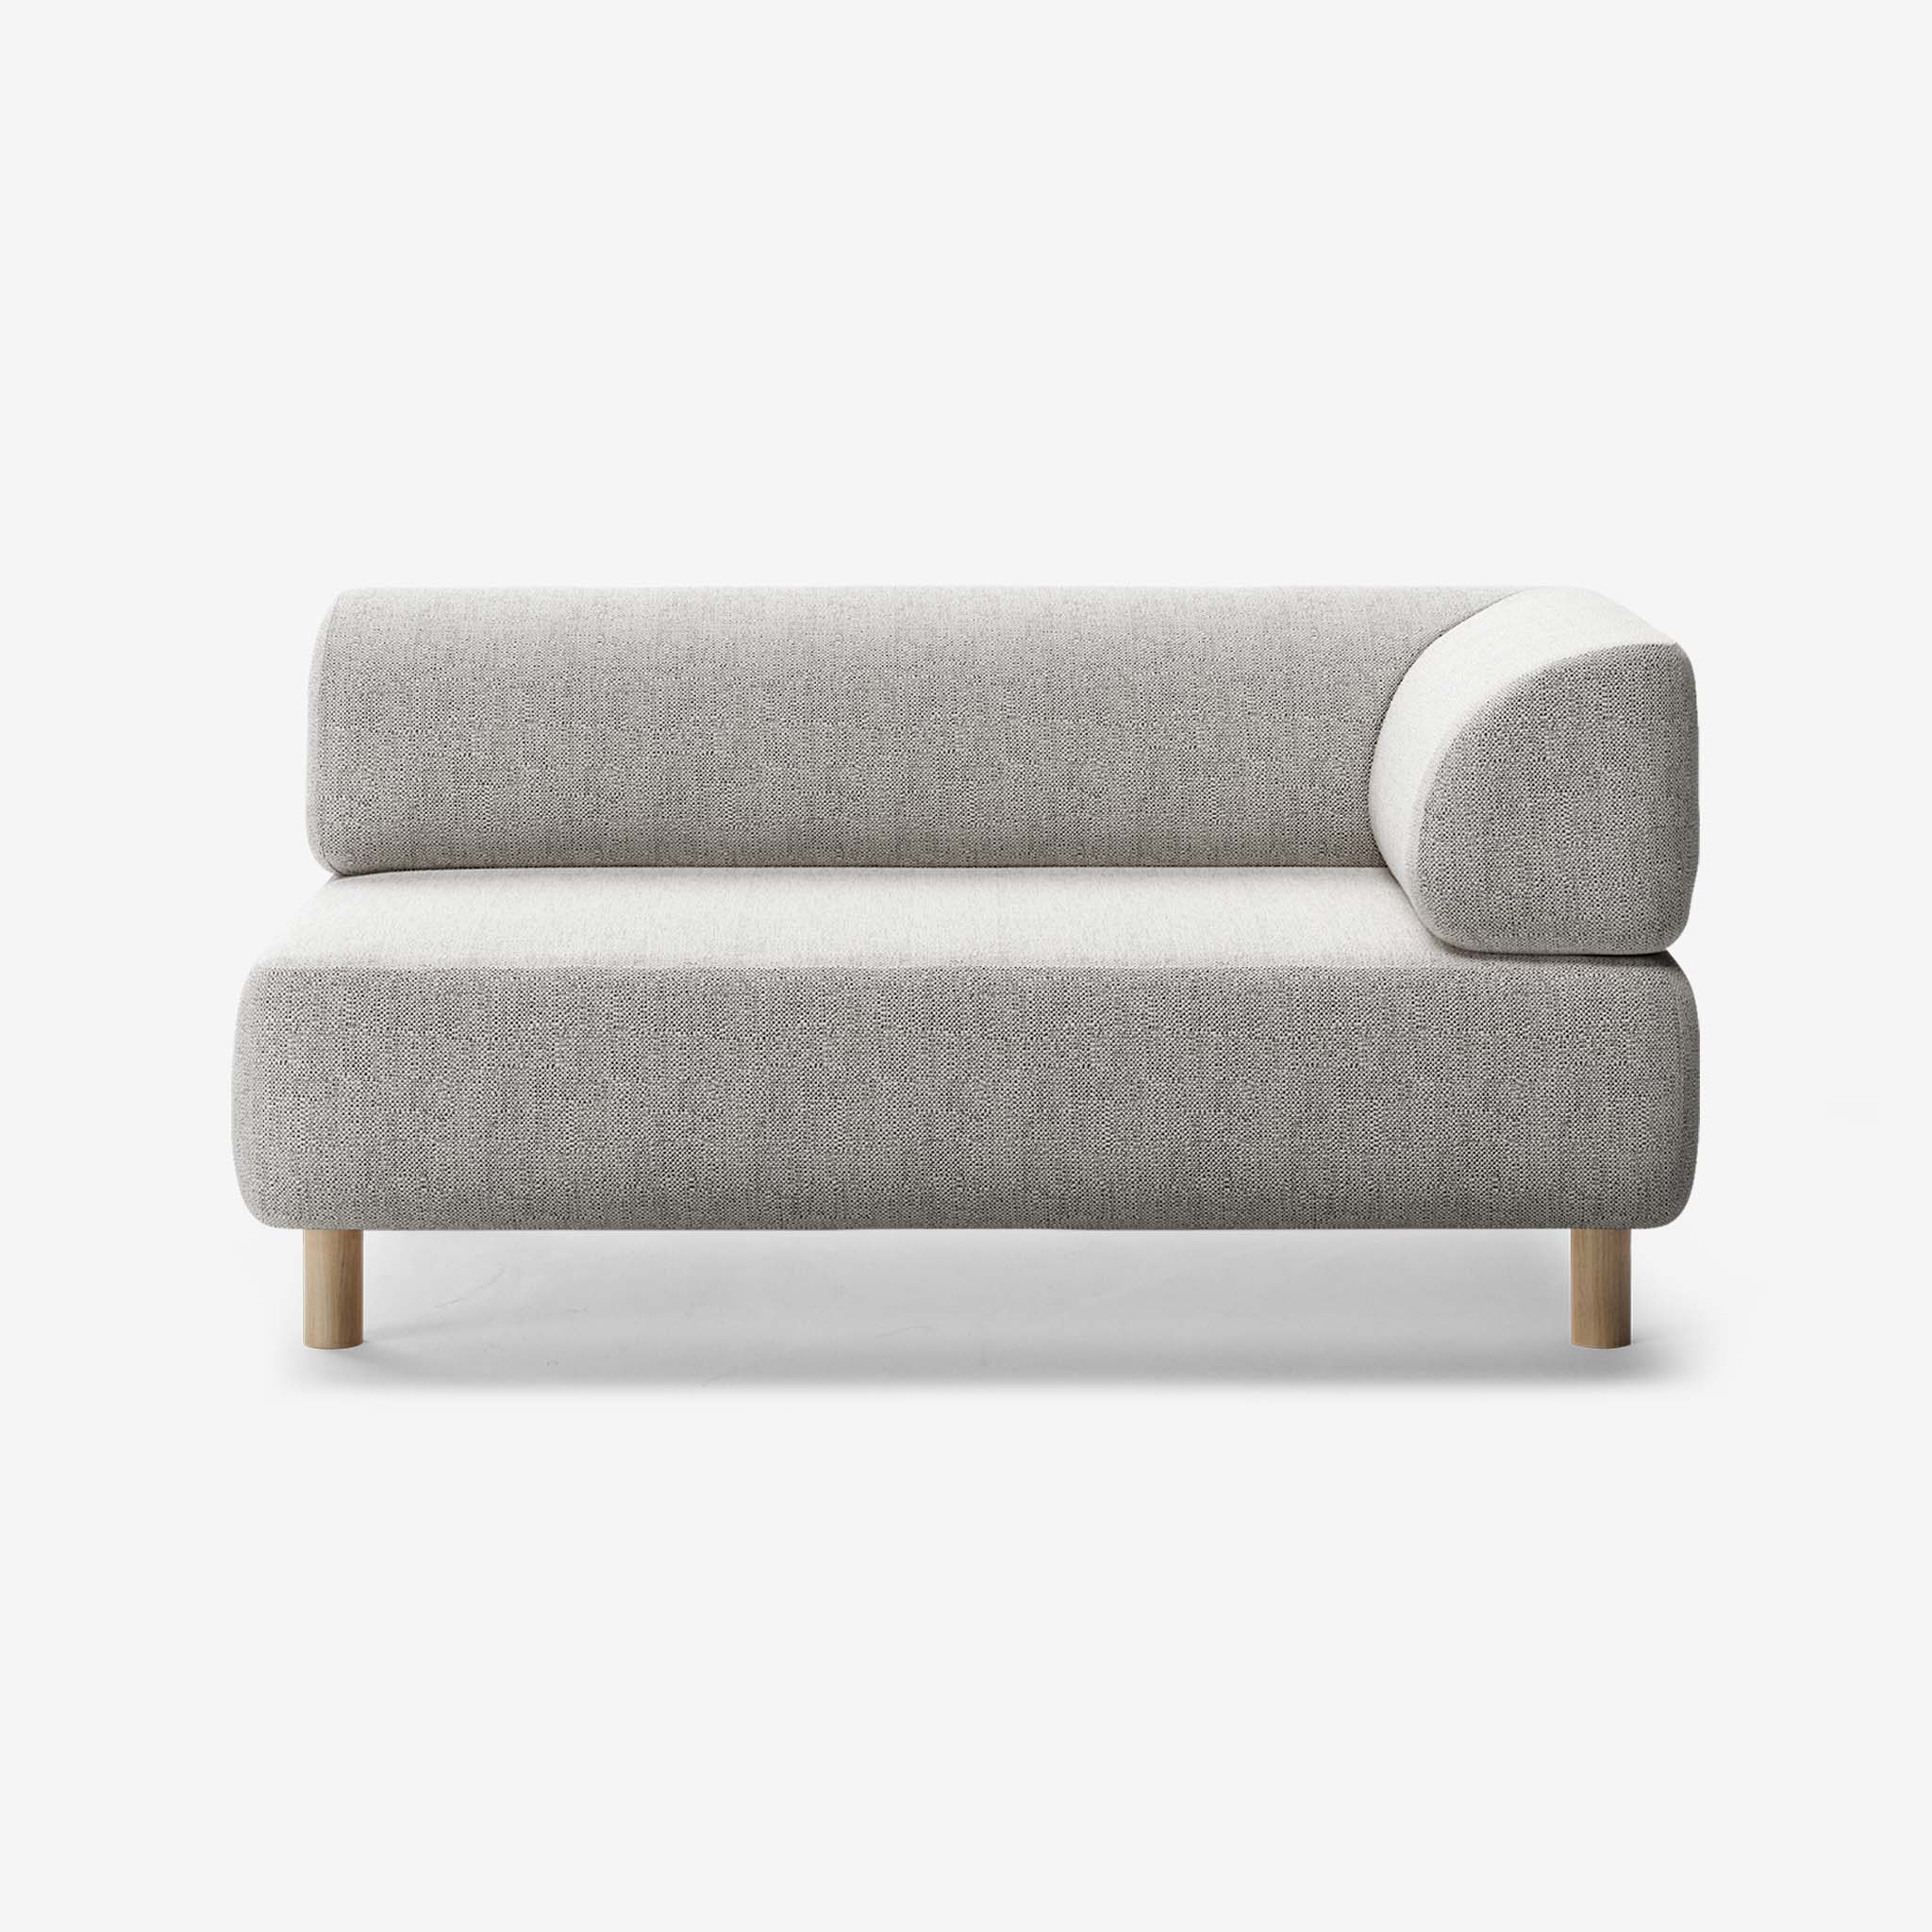 Bolder 2 Sofa Seater With Armrest Right